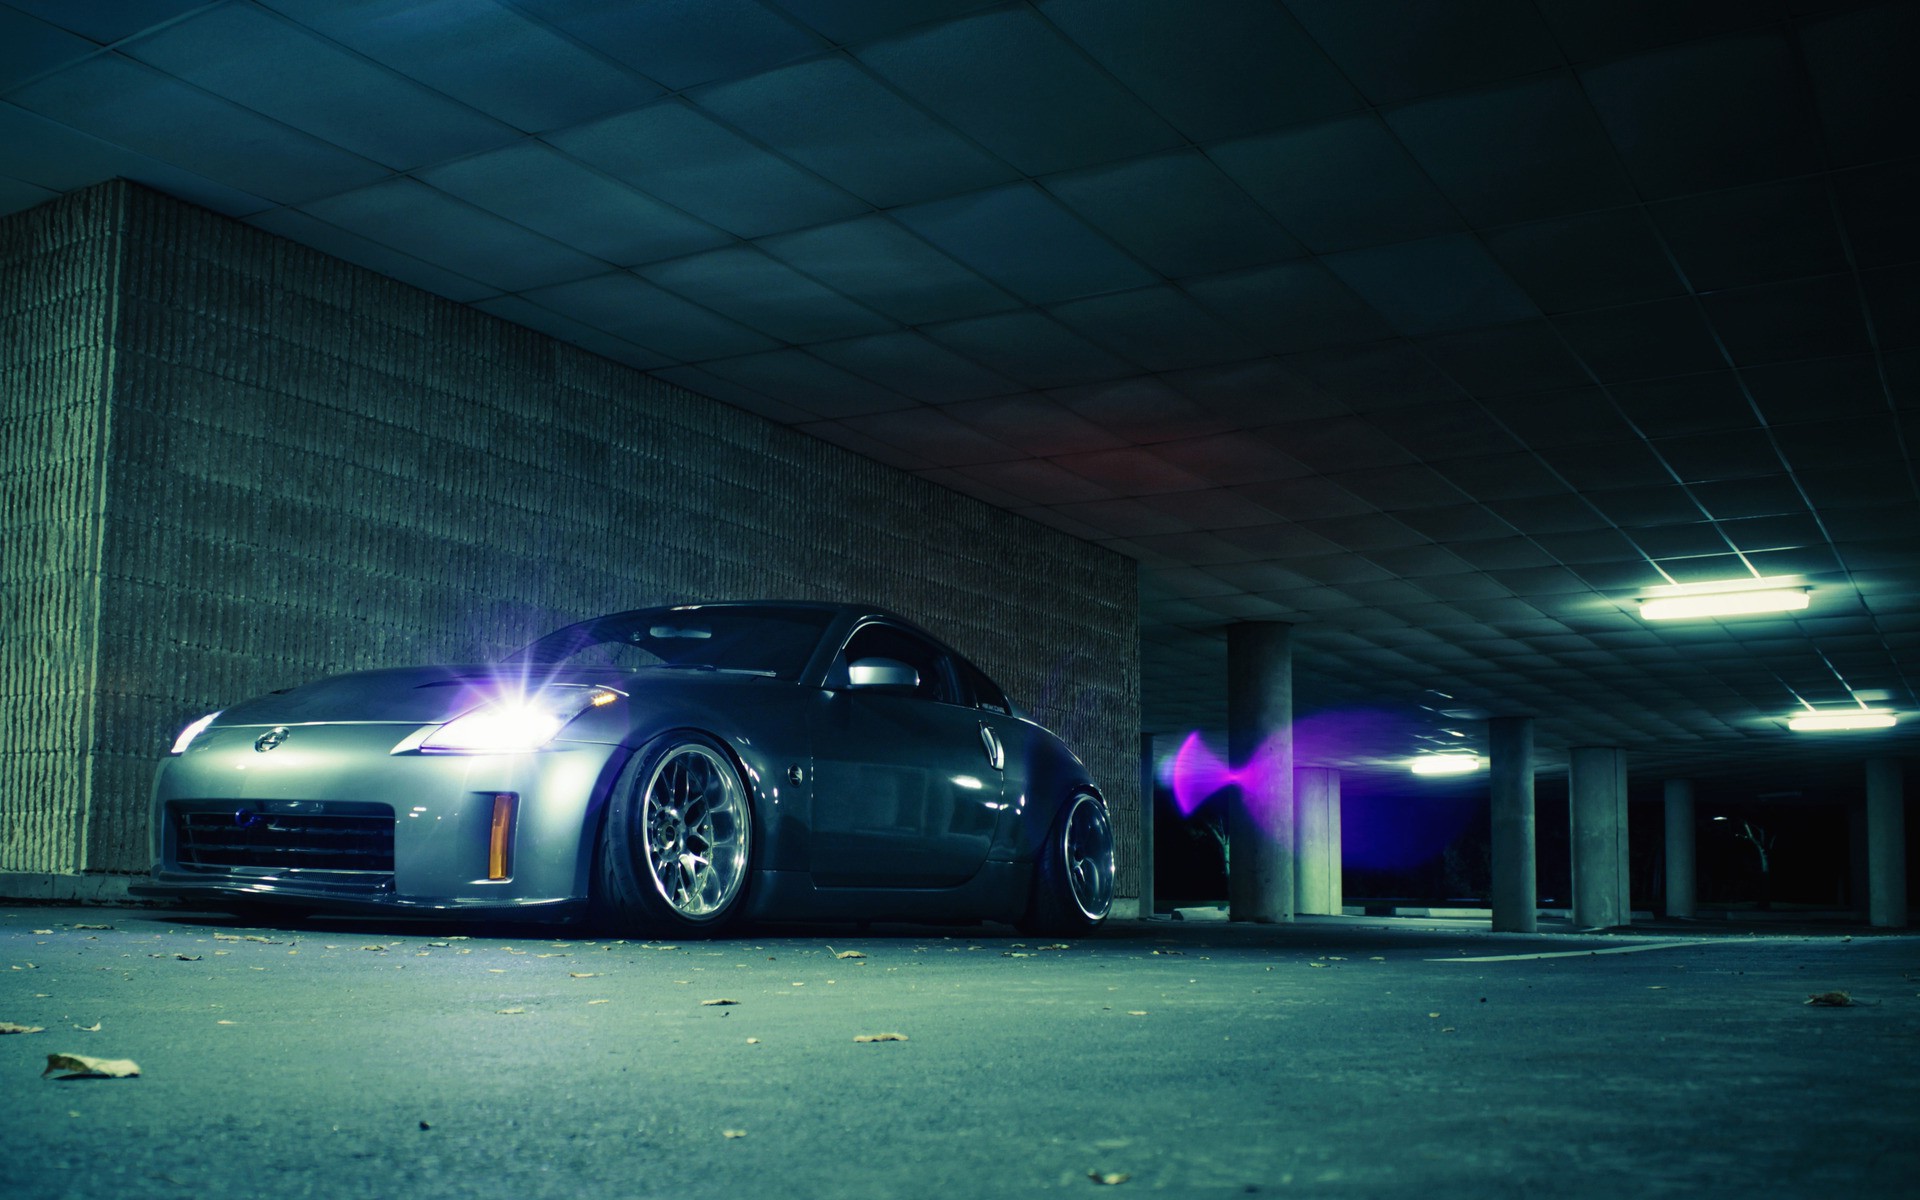 cars, Nissan, Nissan, 350z, Stance, Silver, Cars Wallpaper